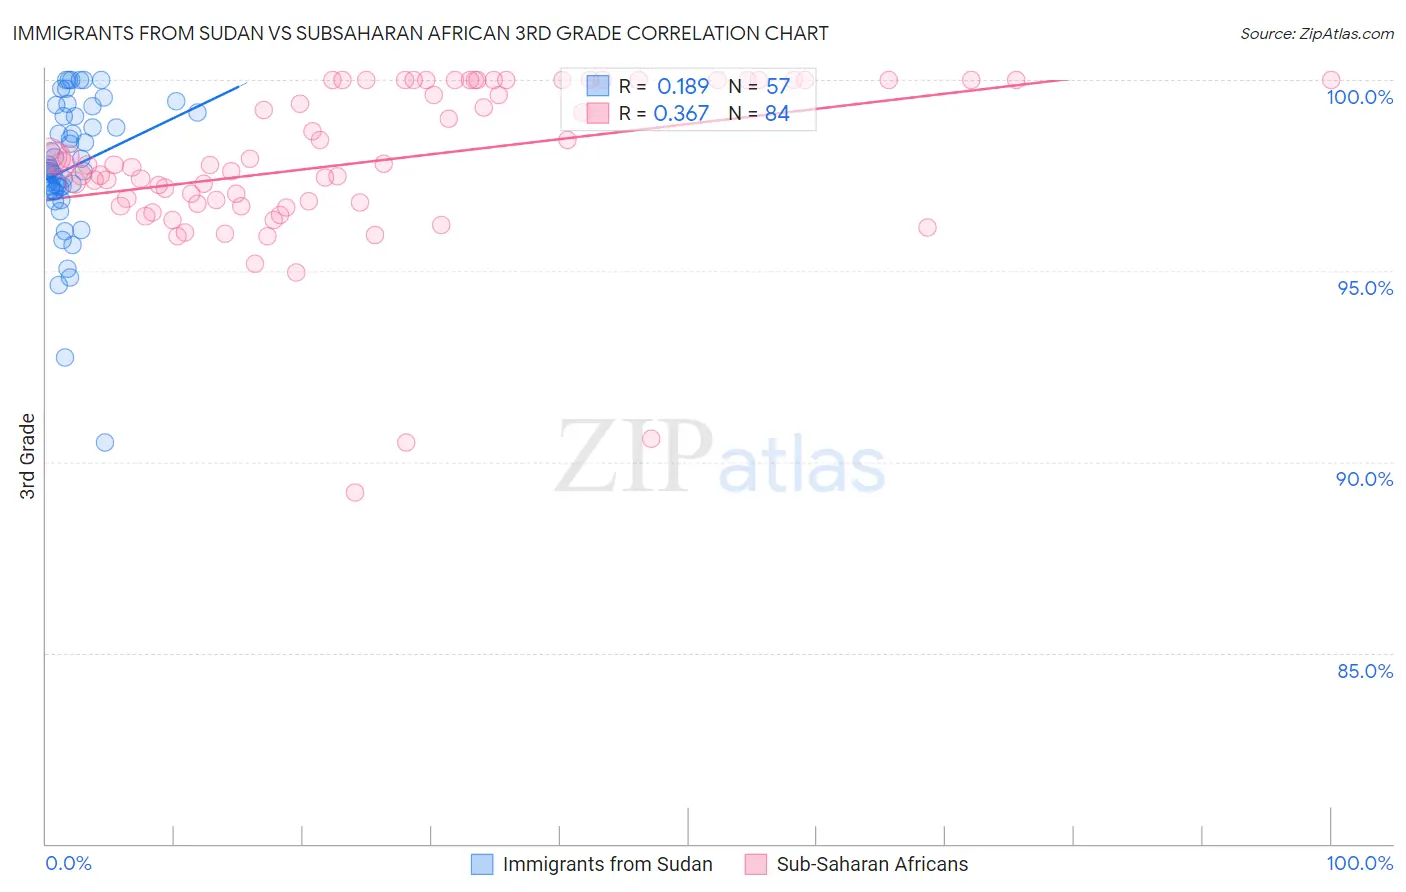 Immigrants from Sudan vs Subsaharan African 3rd Grade